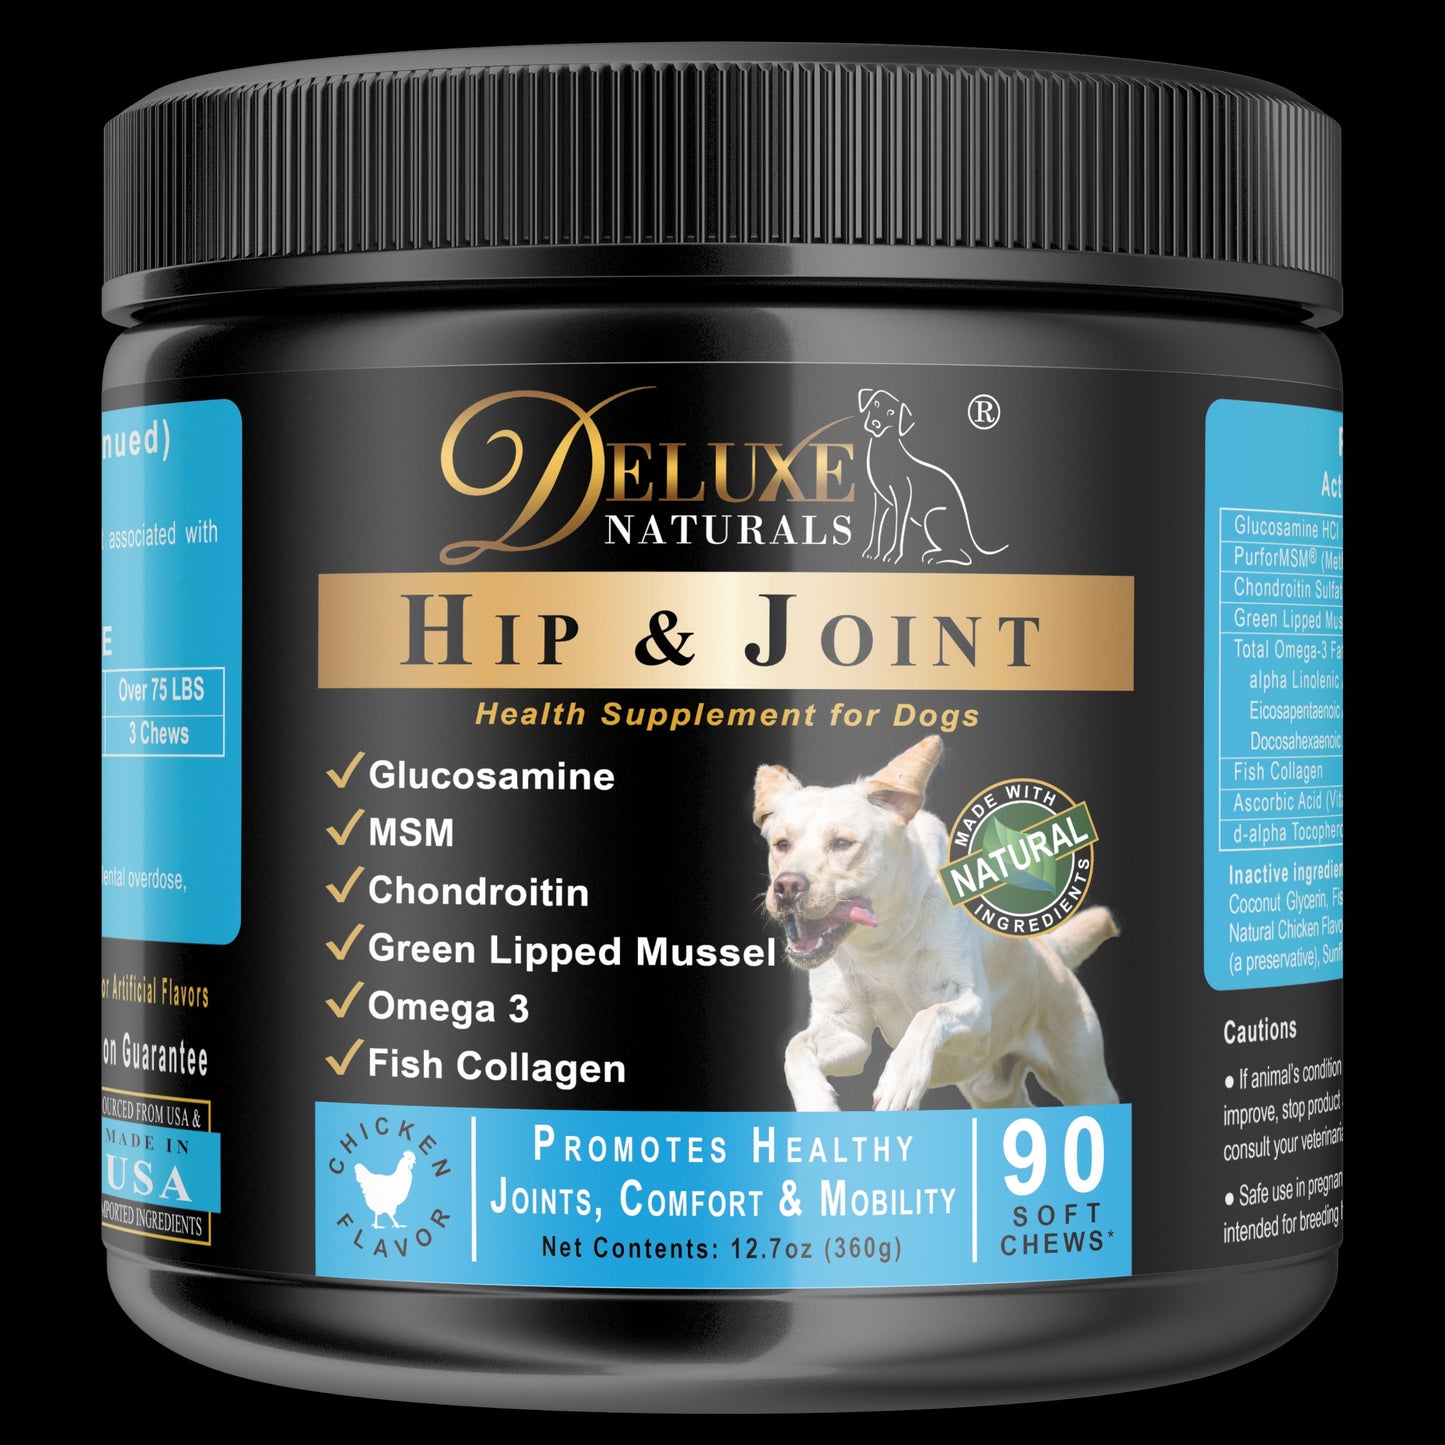 Deluxe Naturals Hip and Joint Soft Chews for Dogs - 270 Count (Pack of 3 x 90ct)